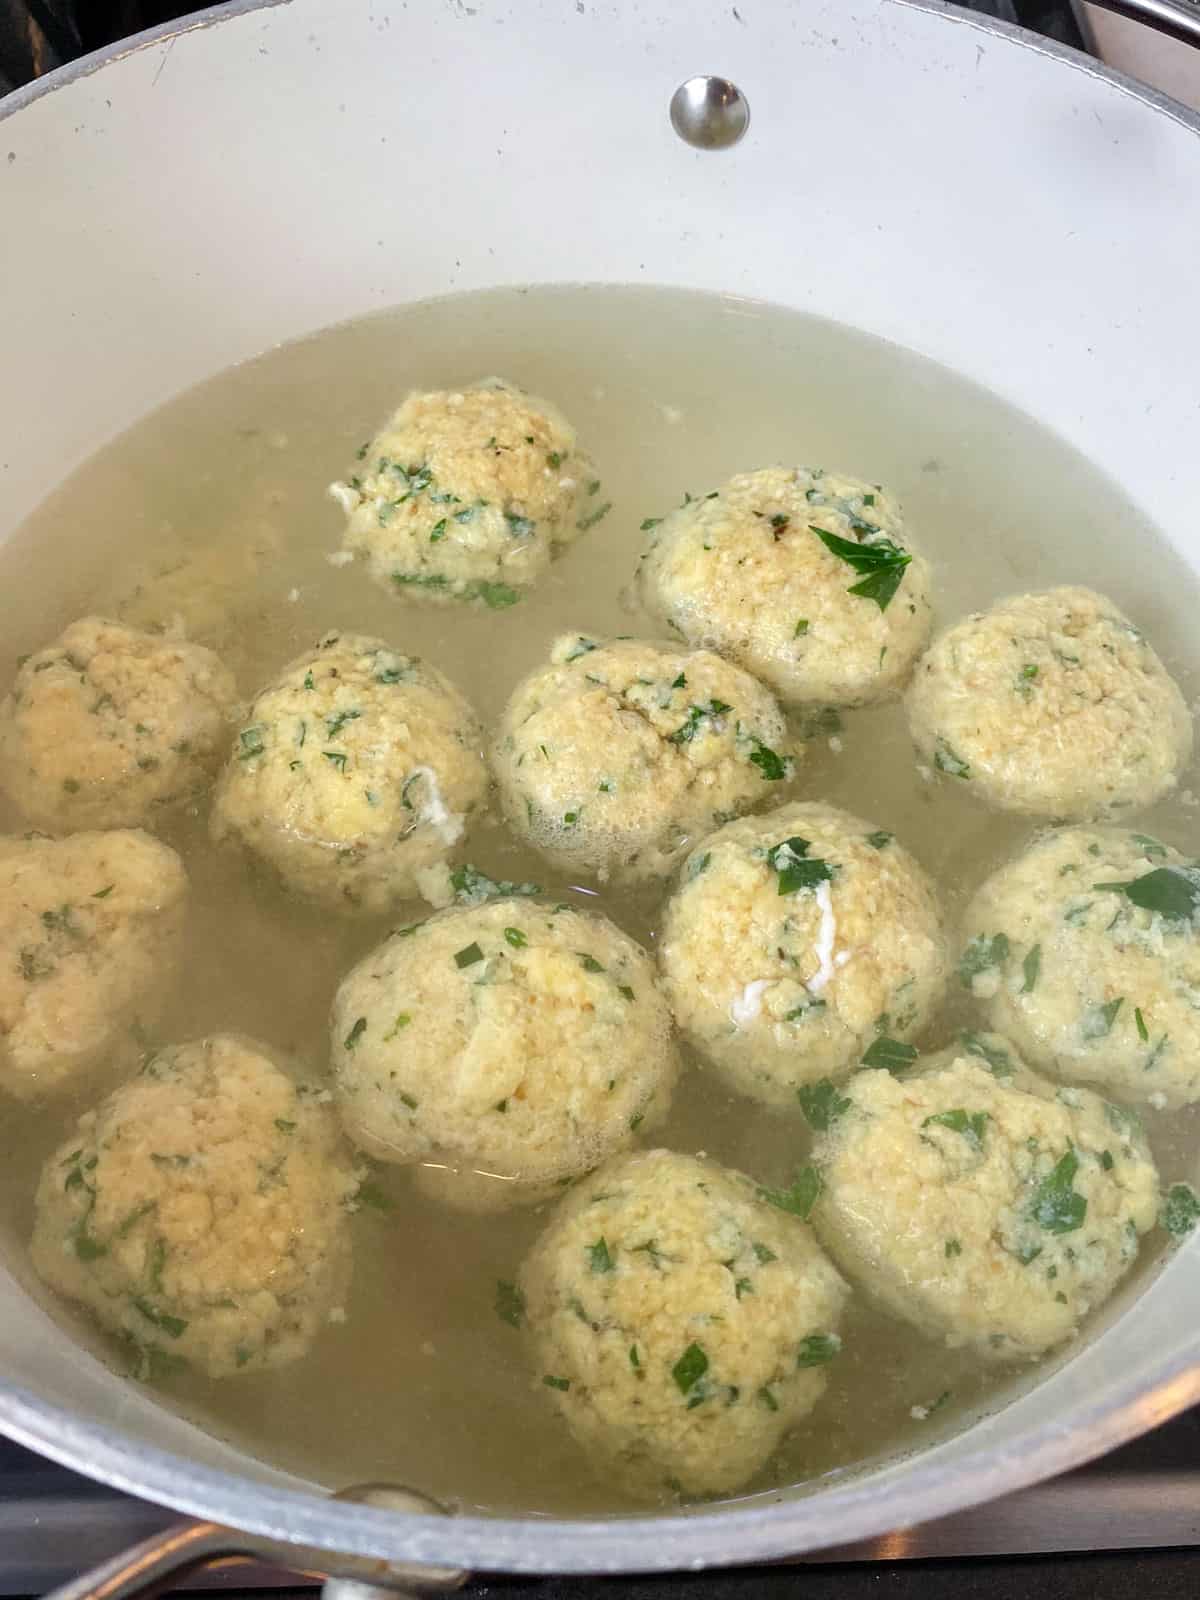 Place the matzo balls into a pot of boiling water and cook for 30 minutes.